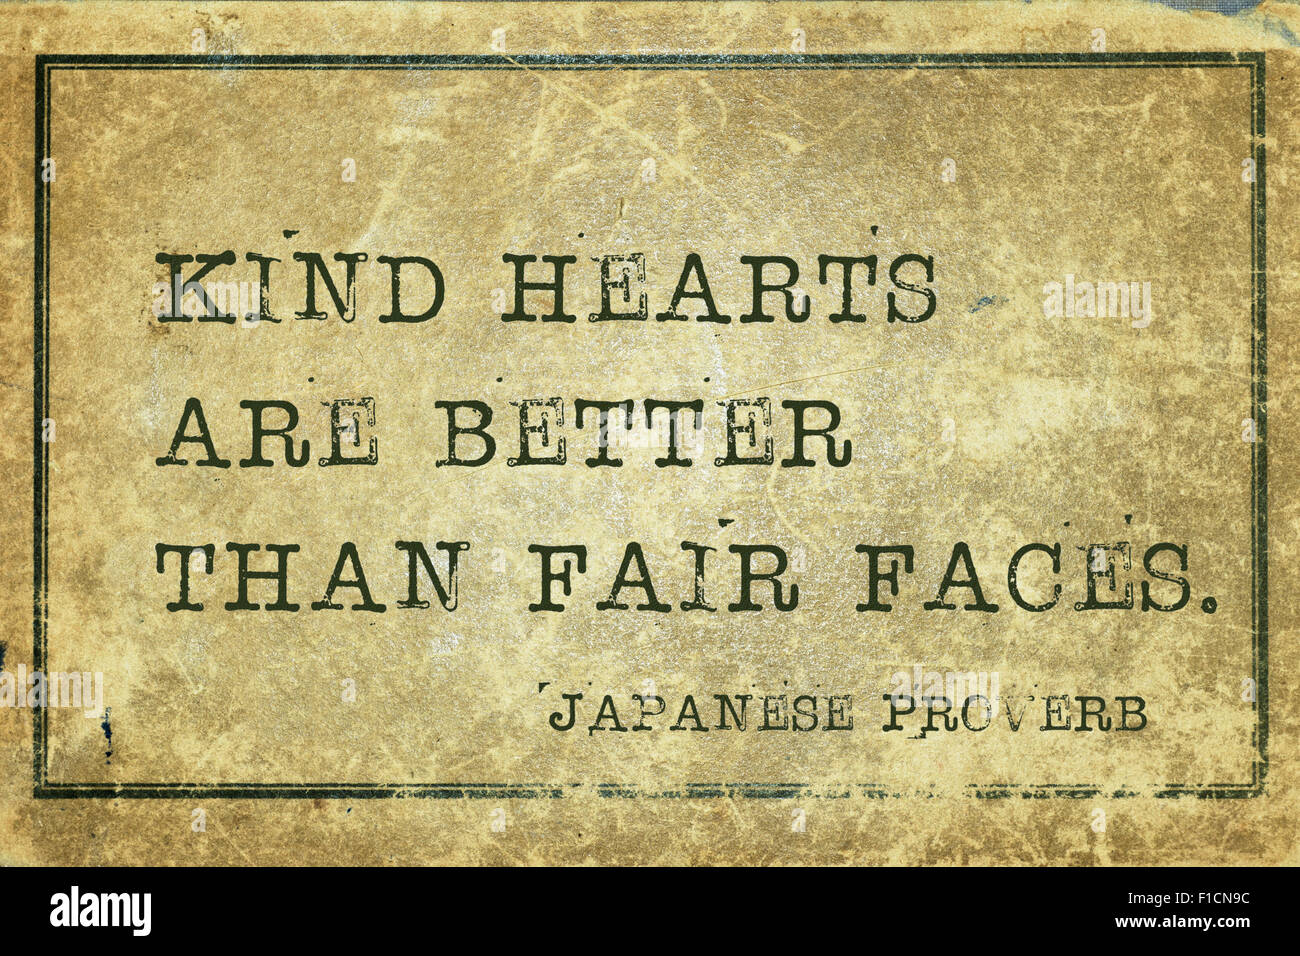 Kind hearts are better than fair faces - ancient Japanese proverb ...